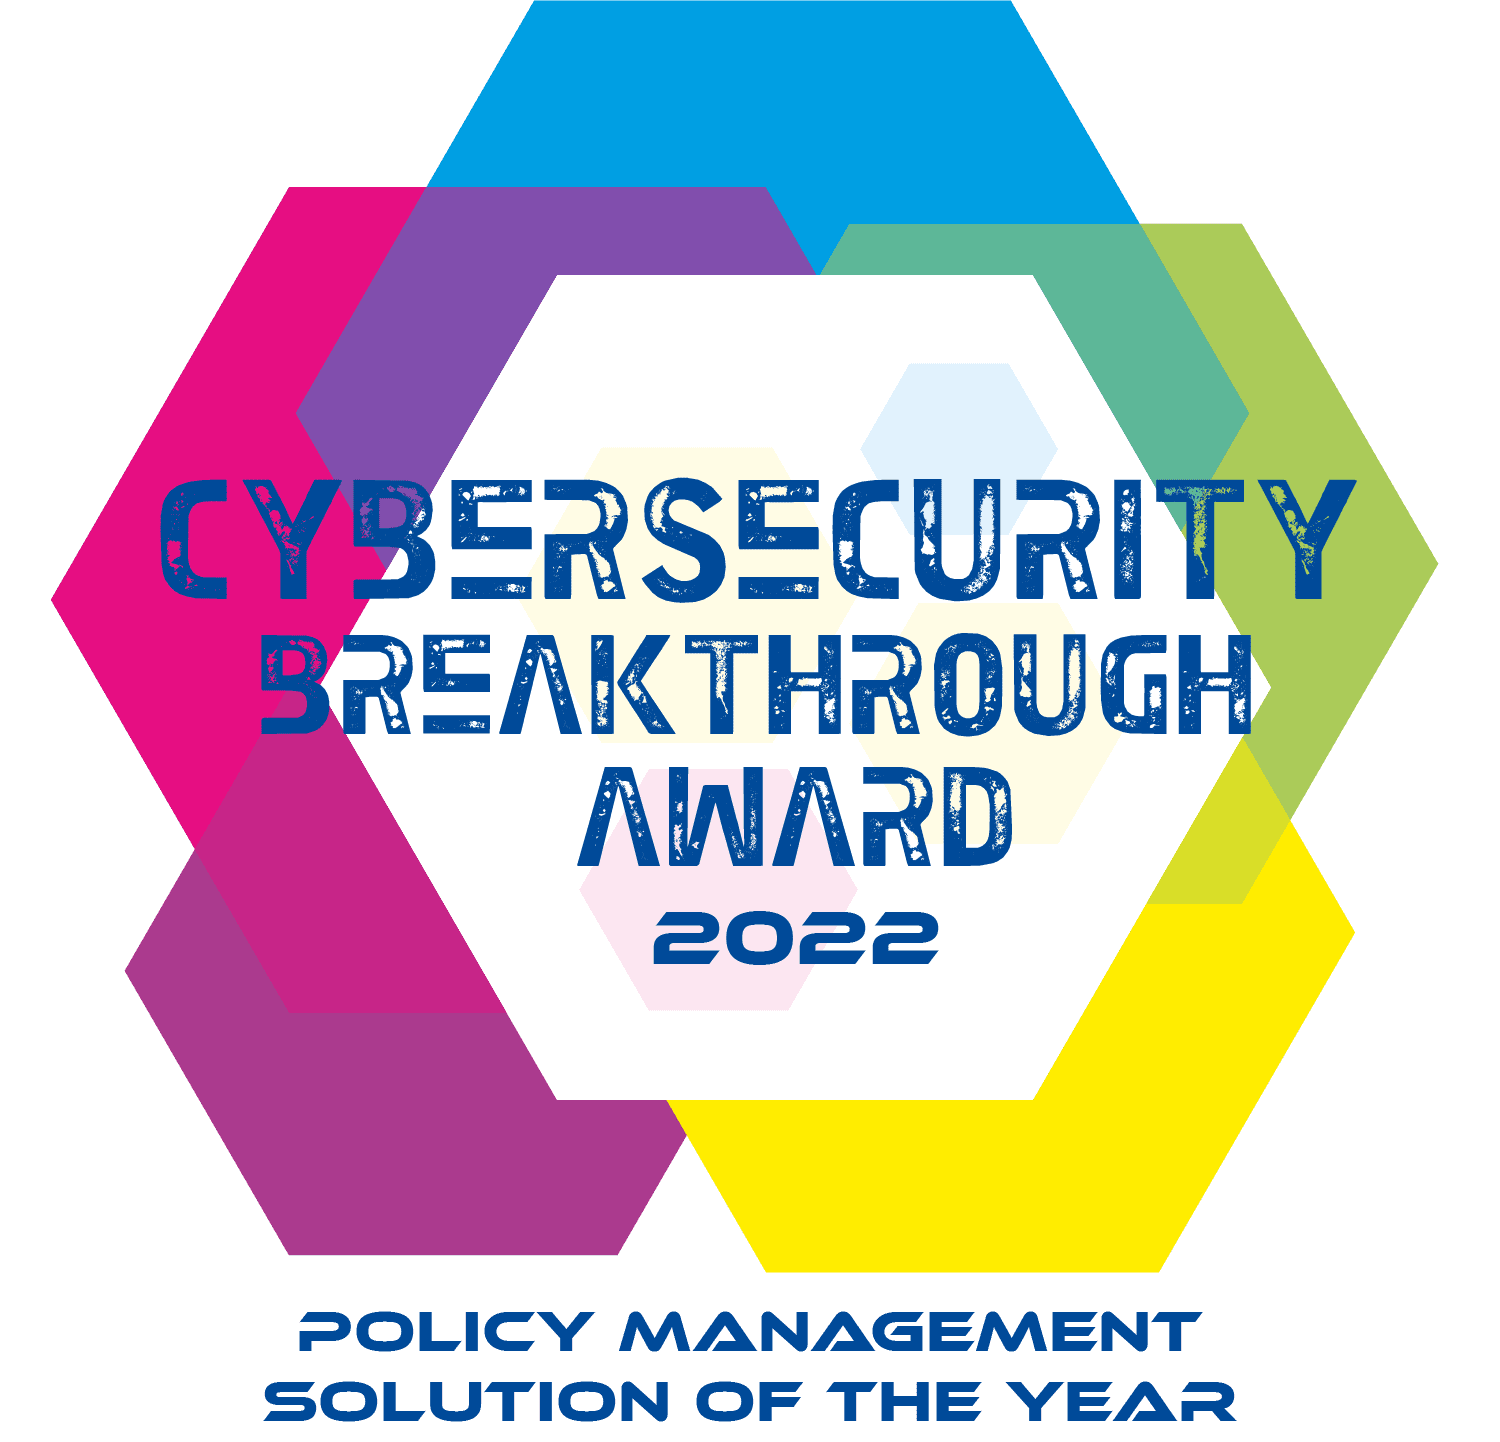 CyberSecurity Breakthrough Awards NC Protect 2022 Policy Management Solution of the Year